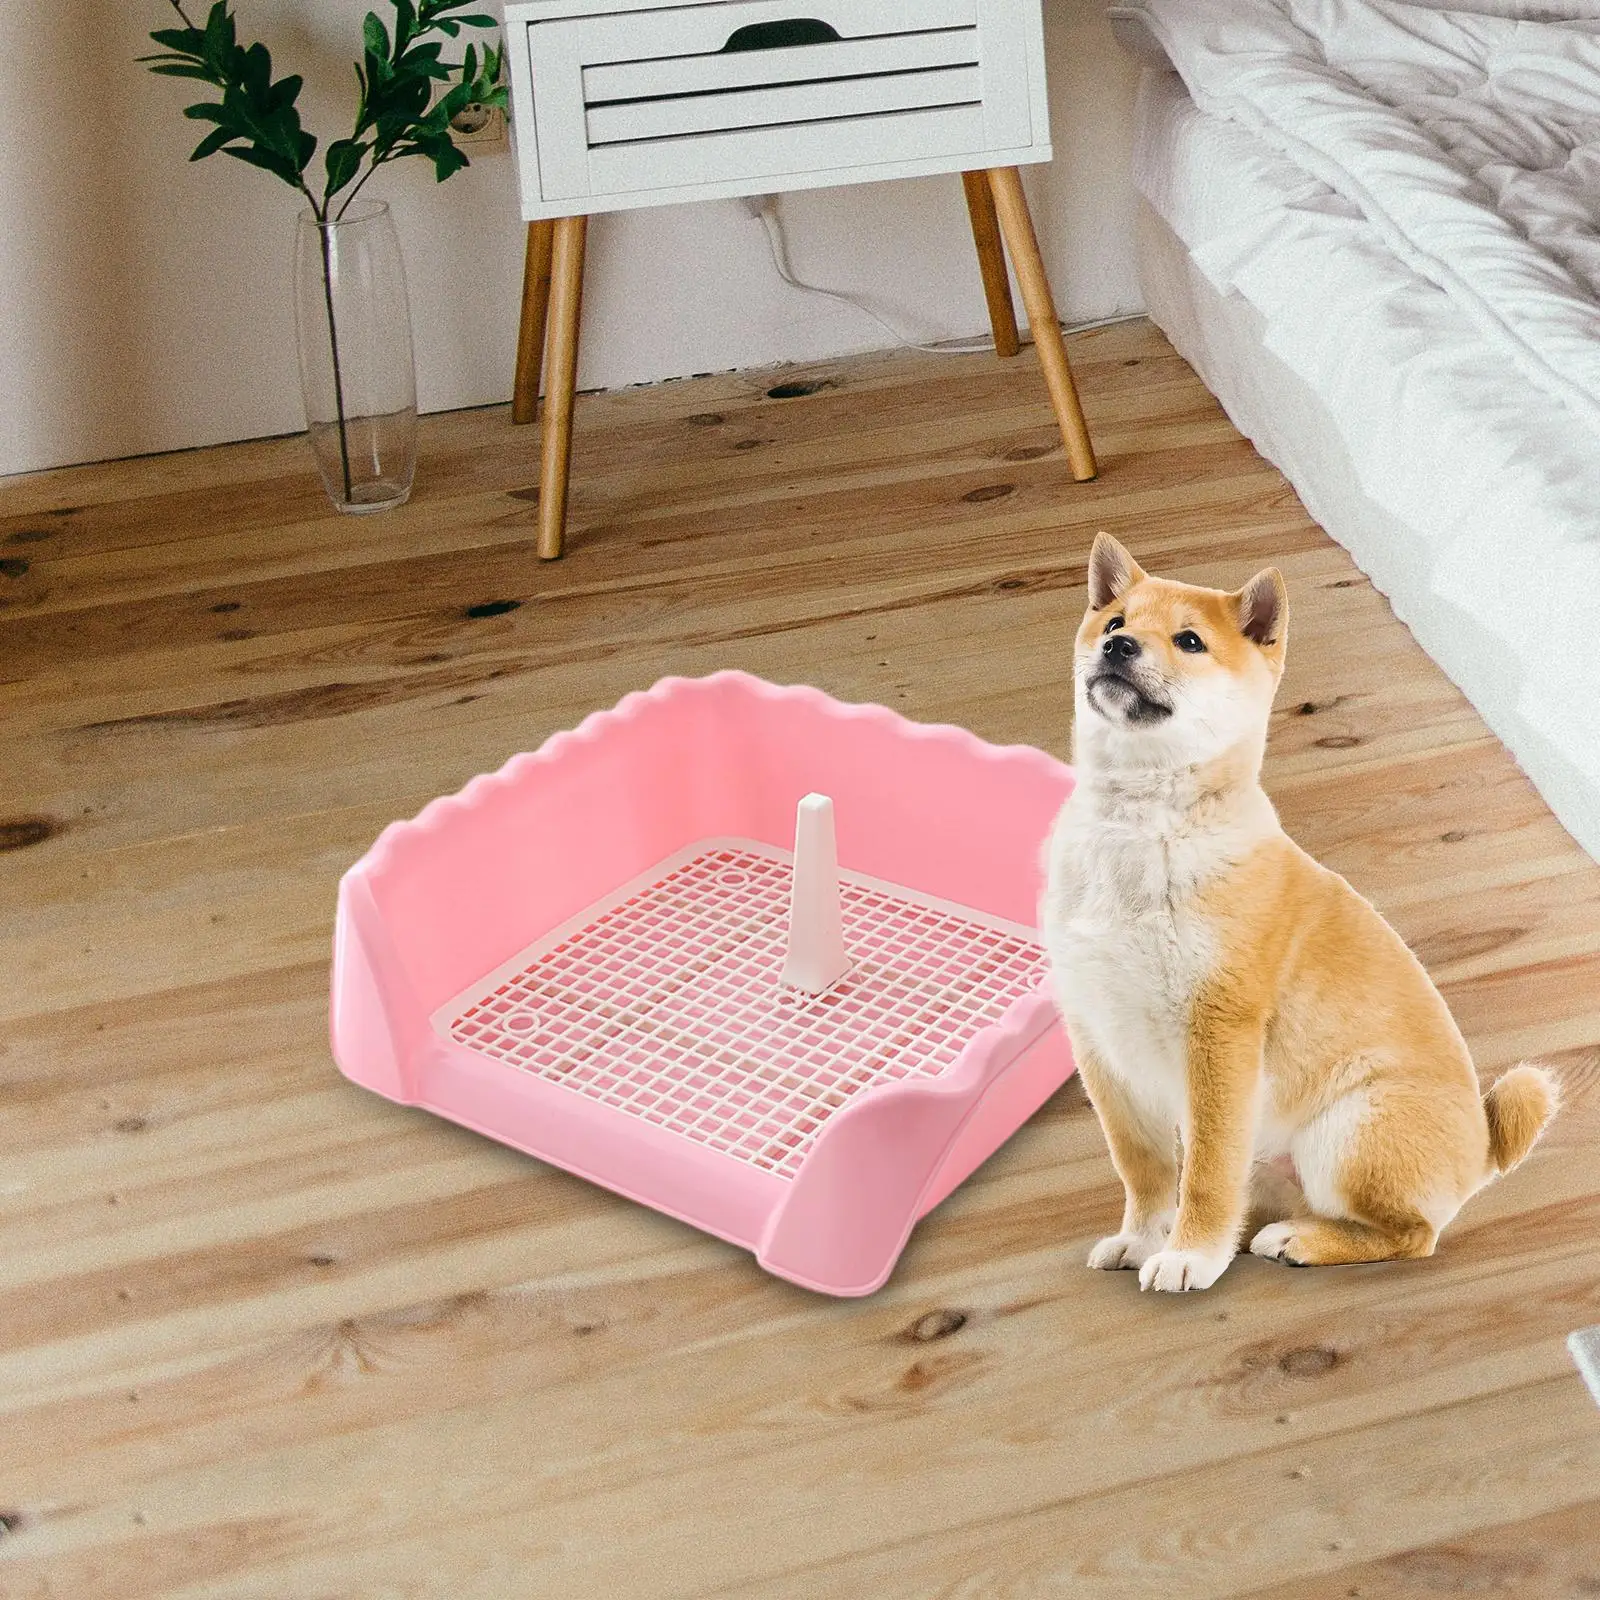 Indoor Dog Potty Tray Keep Floors Clean Non Slip Dog Toilet for Training Chinchilla